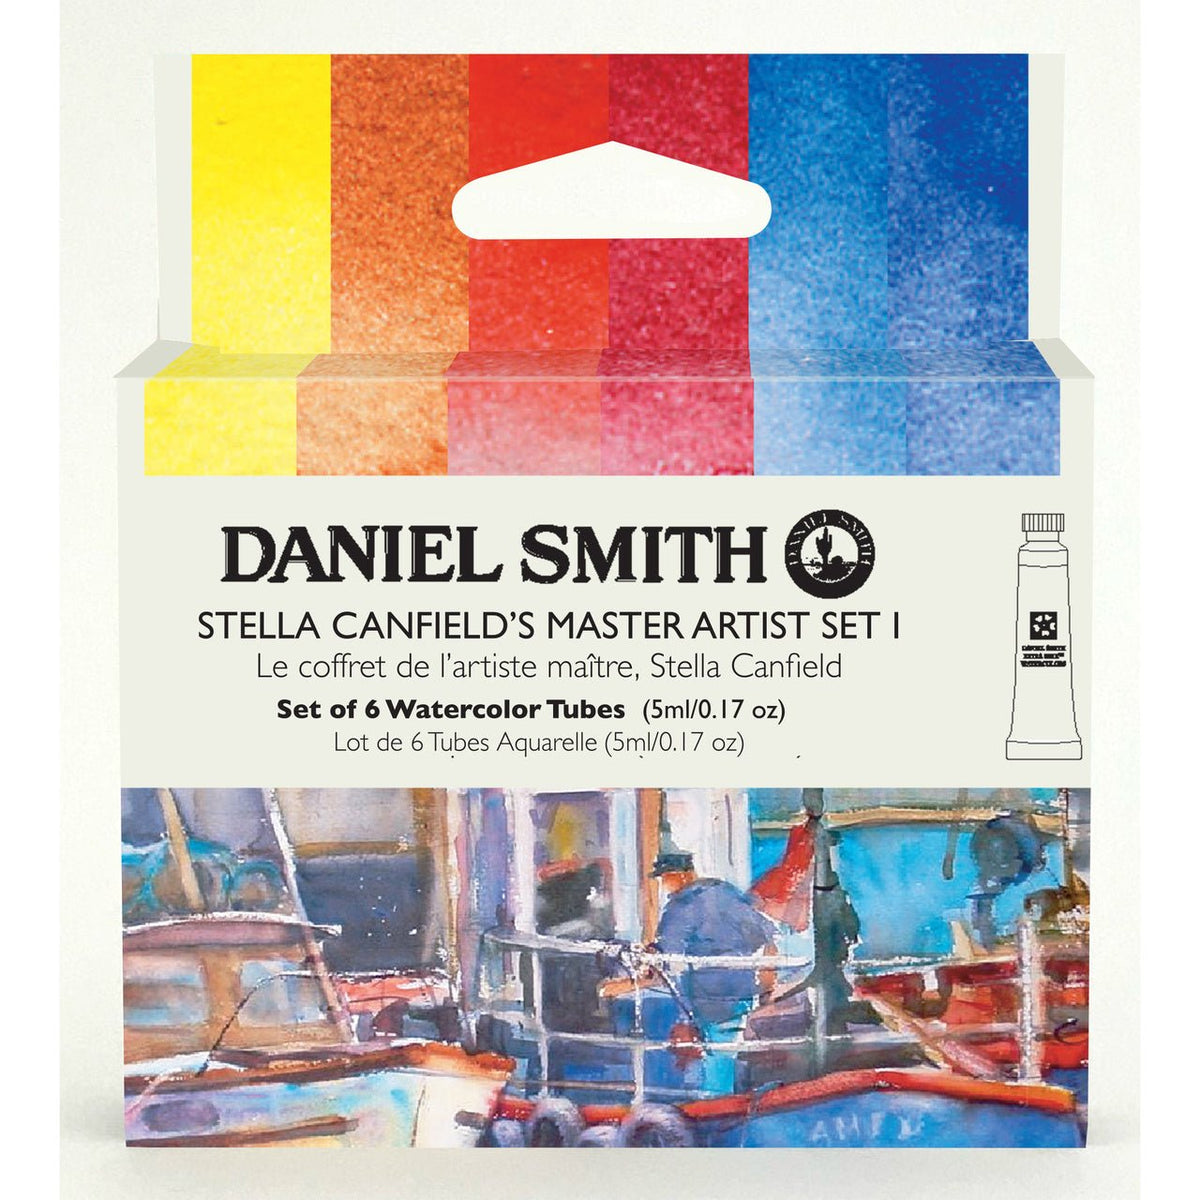 Daniel Smith Extra Fine Watercolor Set - 6 Color Stella Canfield's Master Artist Set #1 (6 X 5ml tubes) - merriartist.com